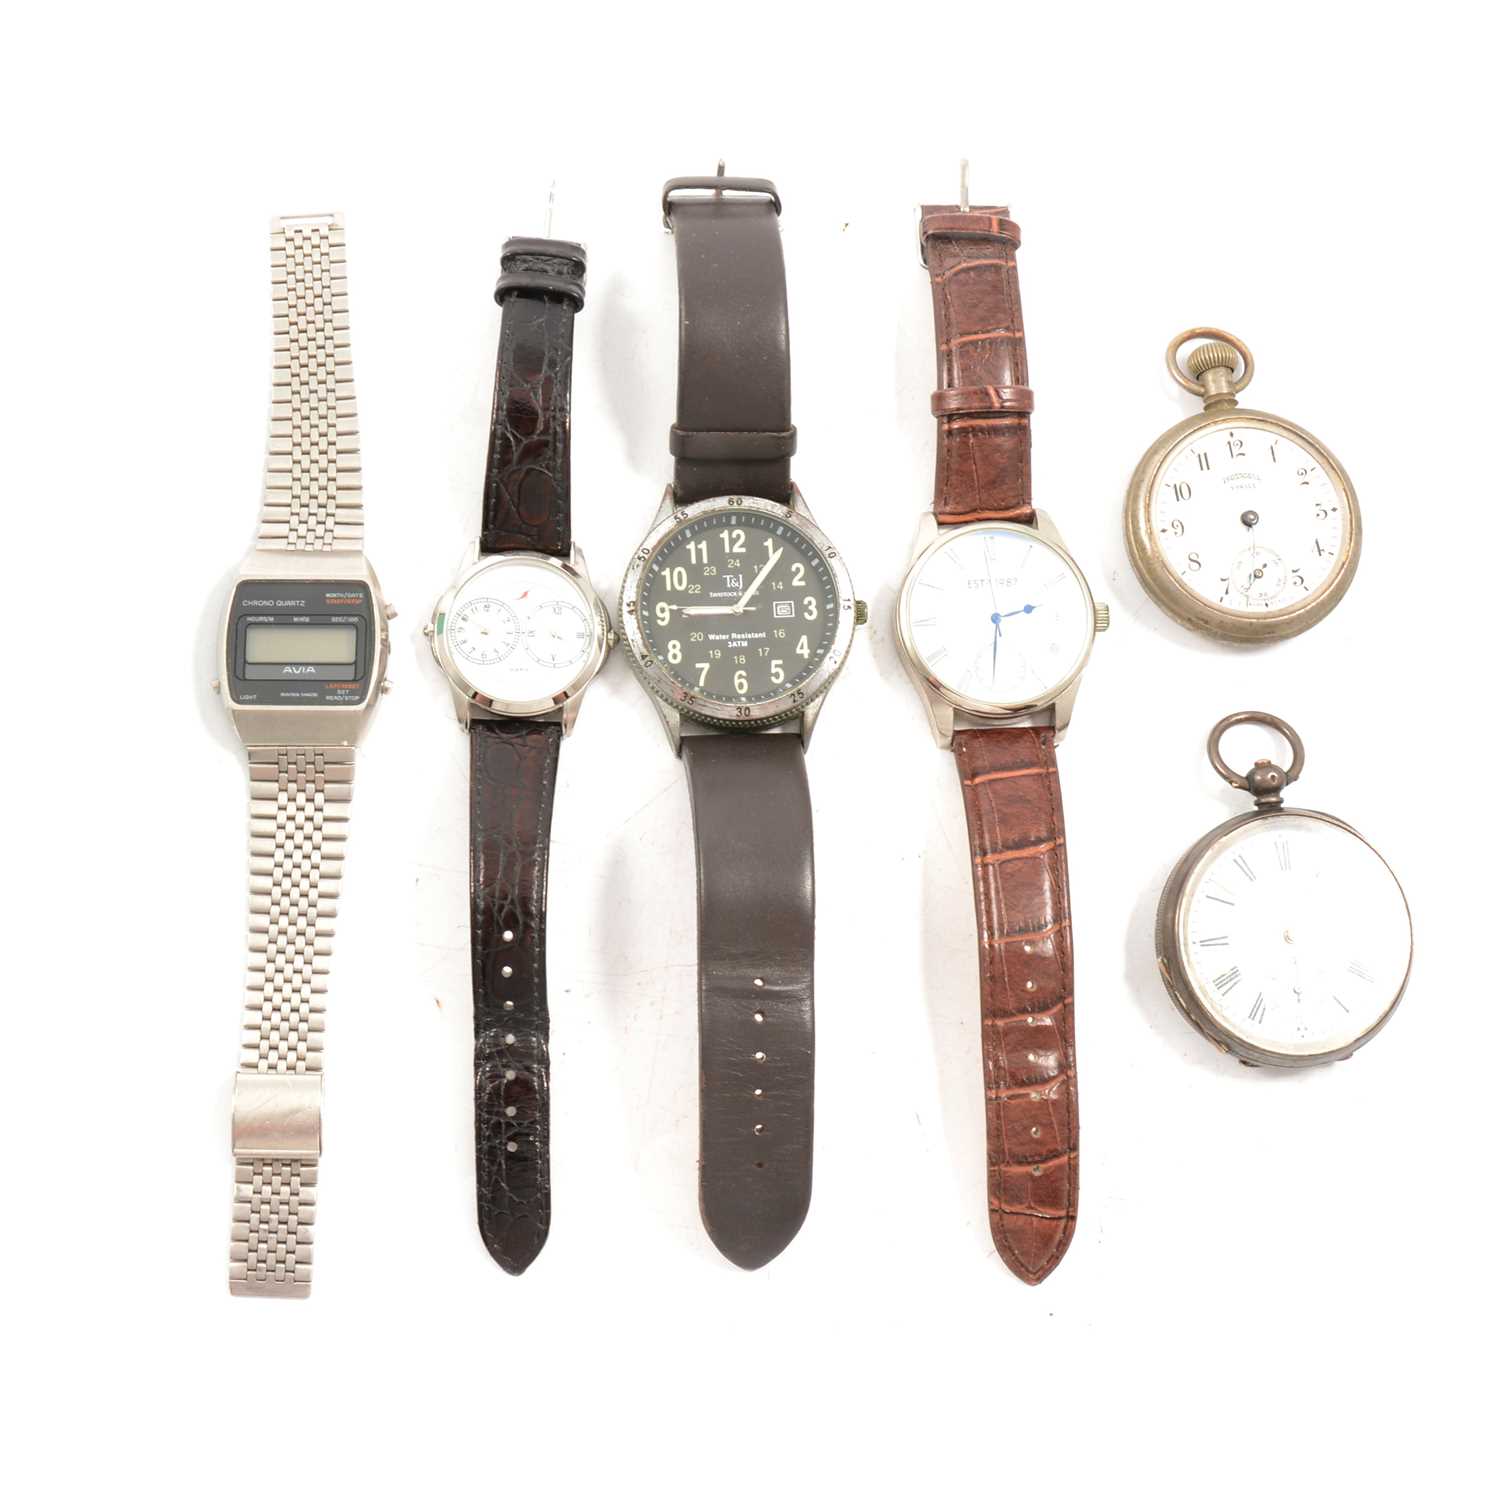 Lot 338 - A collection of wrist and pocket watches, Eterna-Matic, Citizen, two silver pocket watches etc.